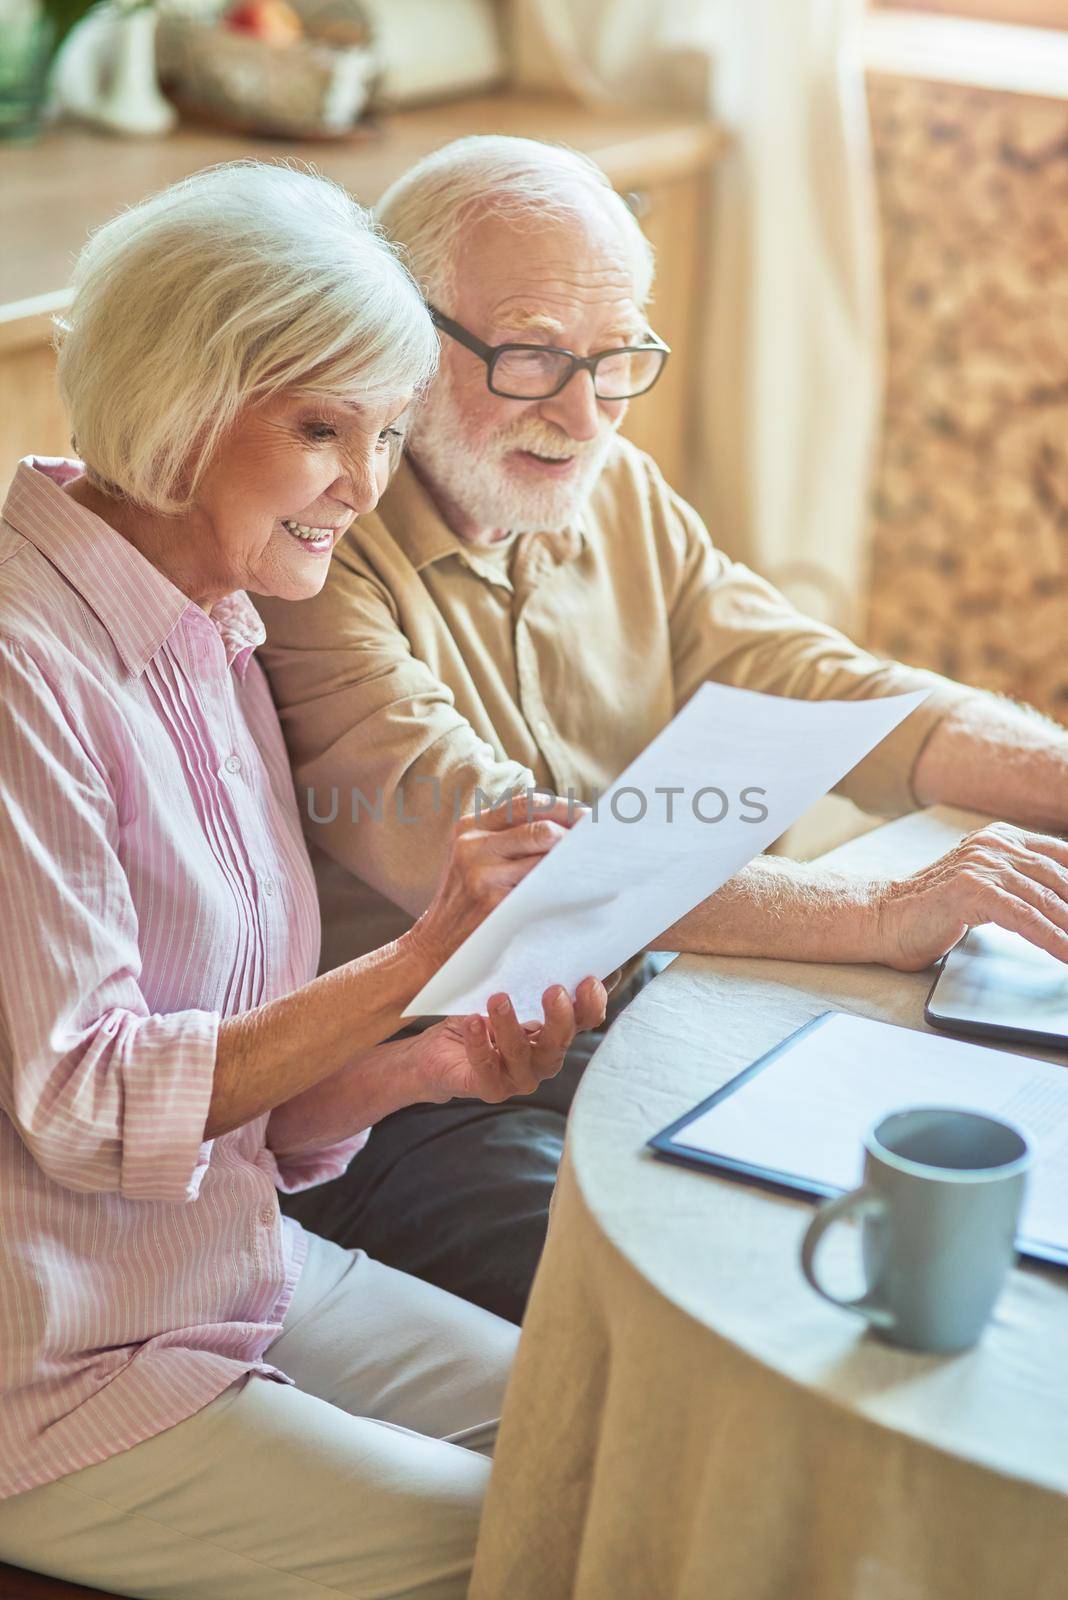 Smiling elderly woman checking bills with her spouse by friendsstock